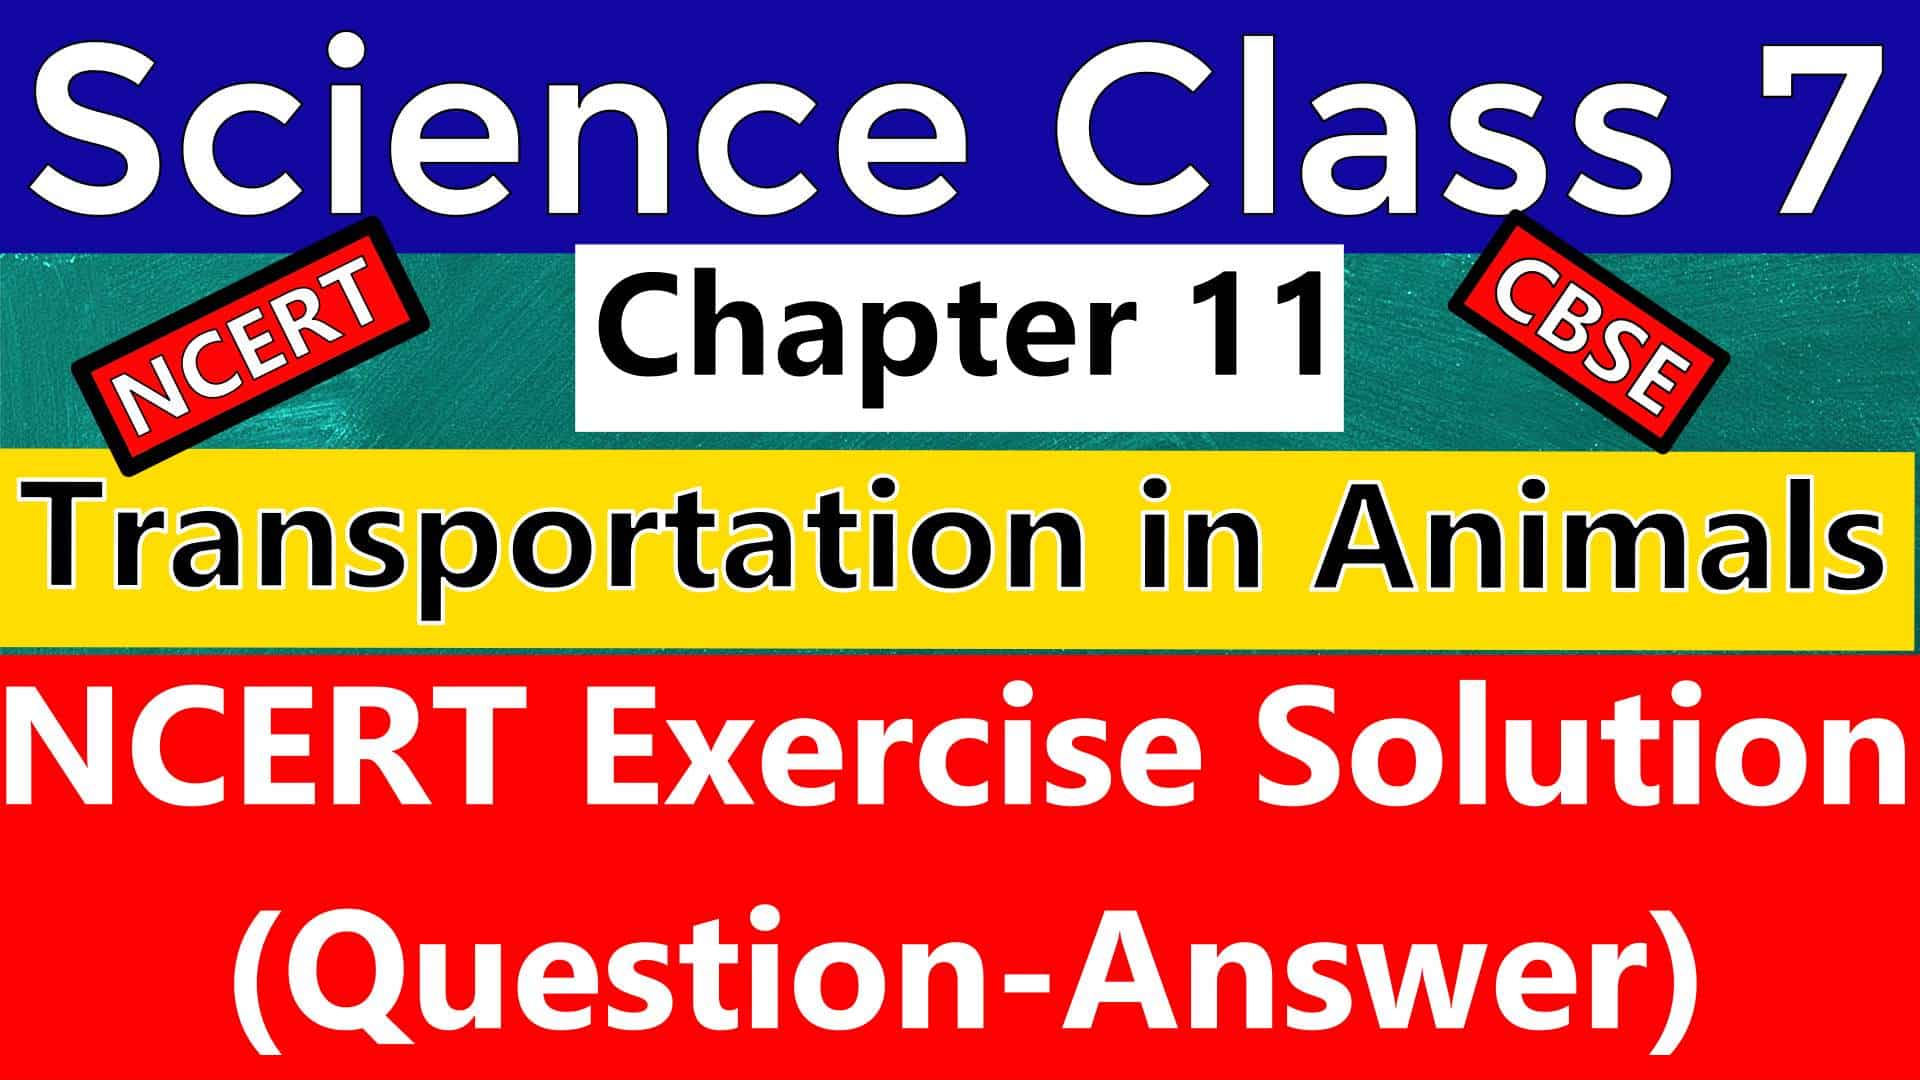 Transportation in Animals and Plants NCERT Exercise Solution- CBSE